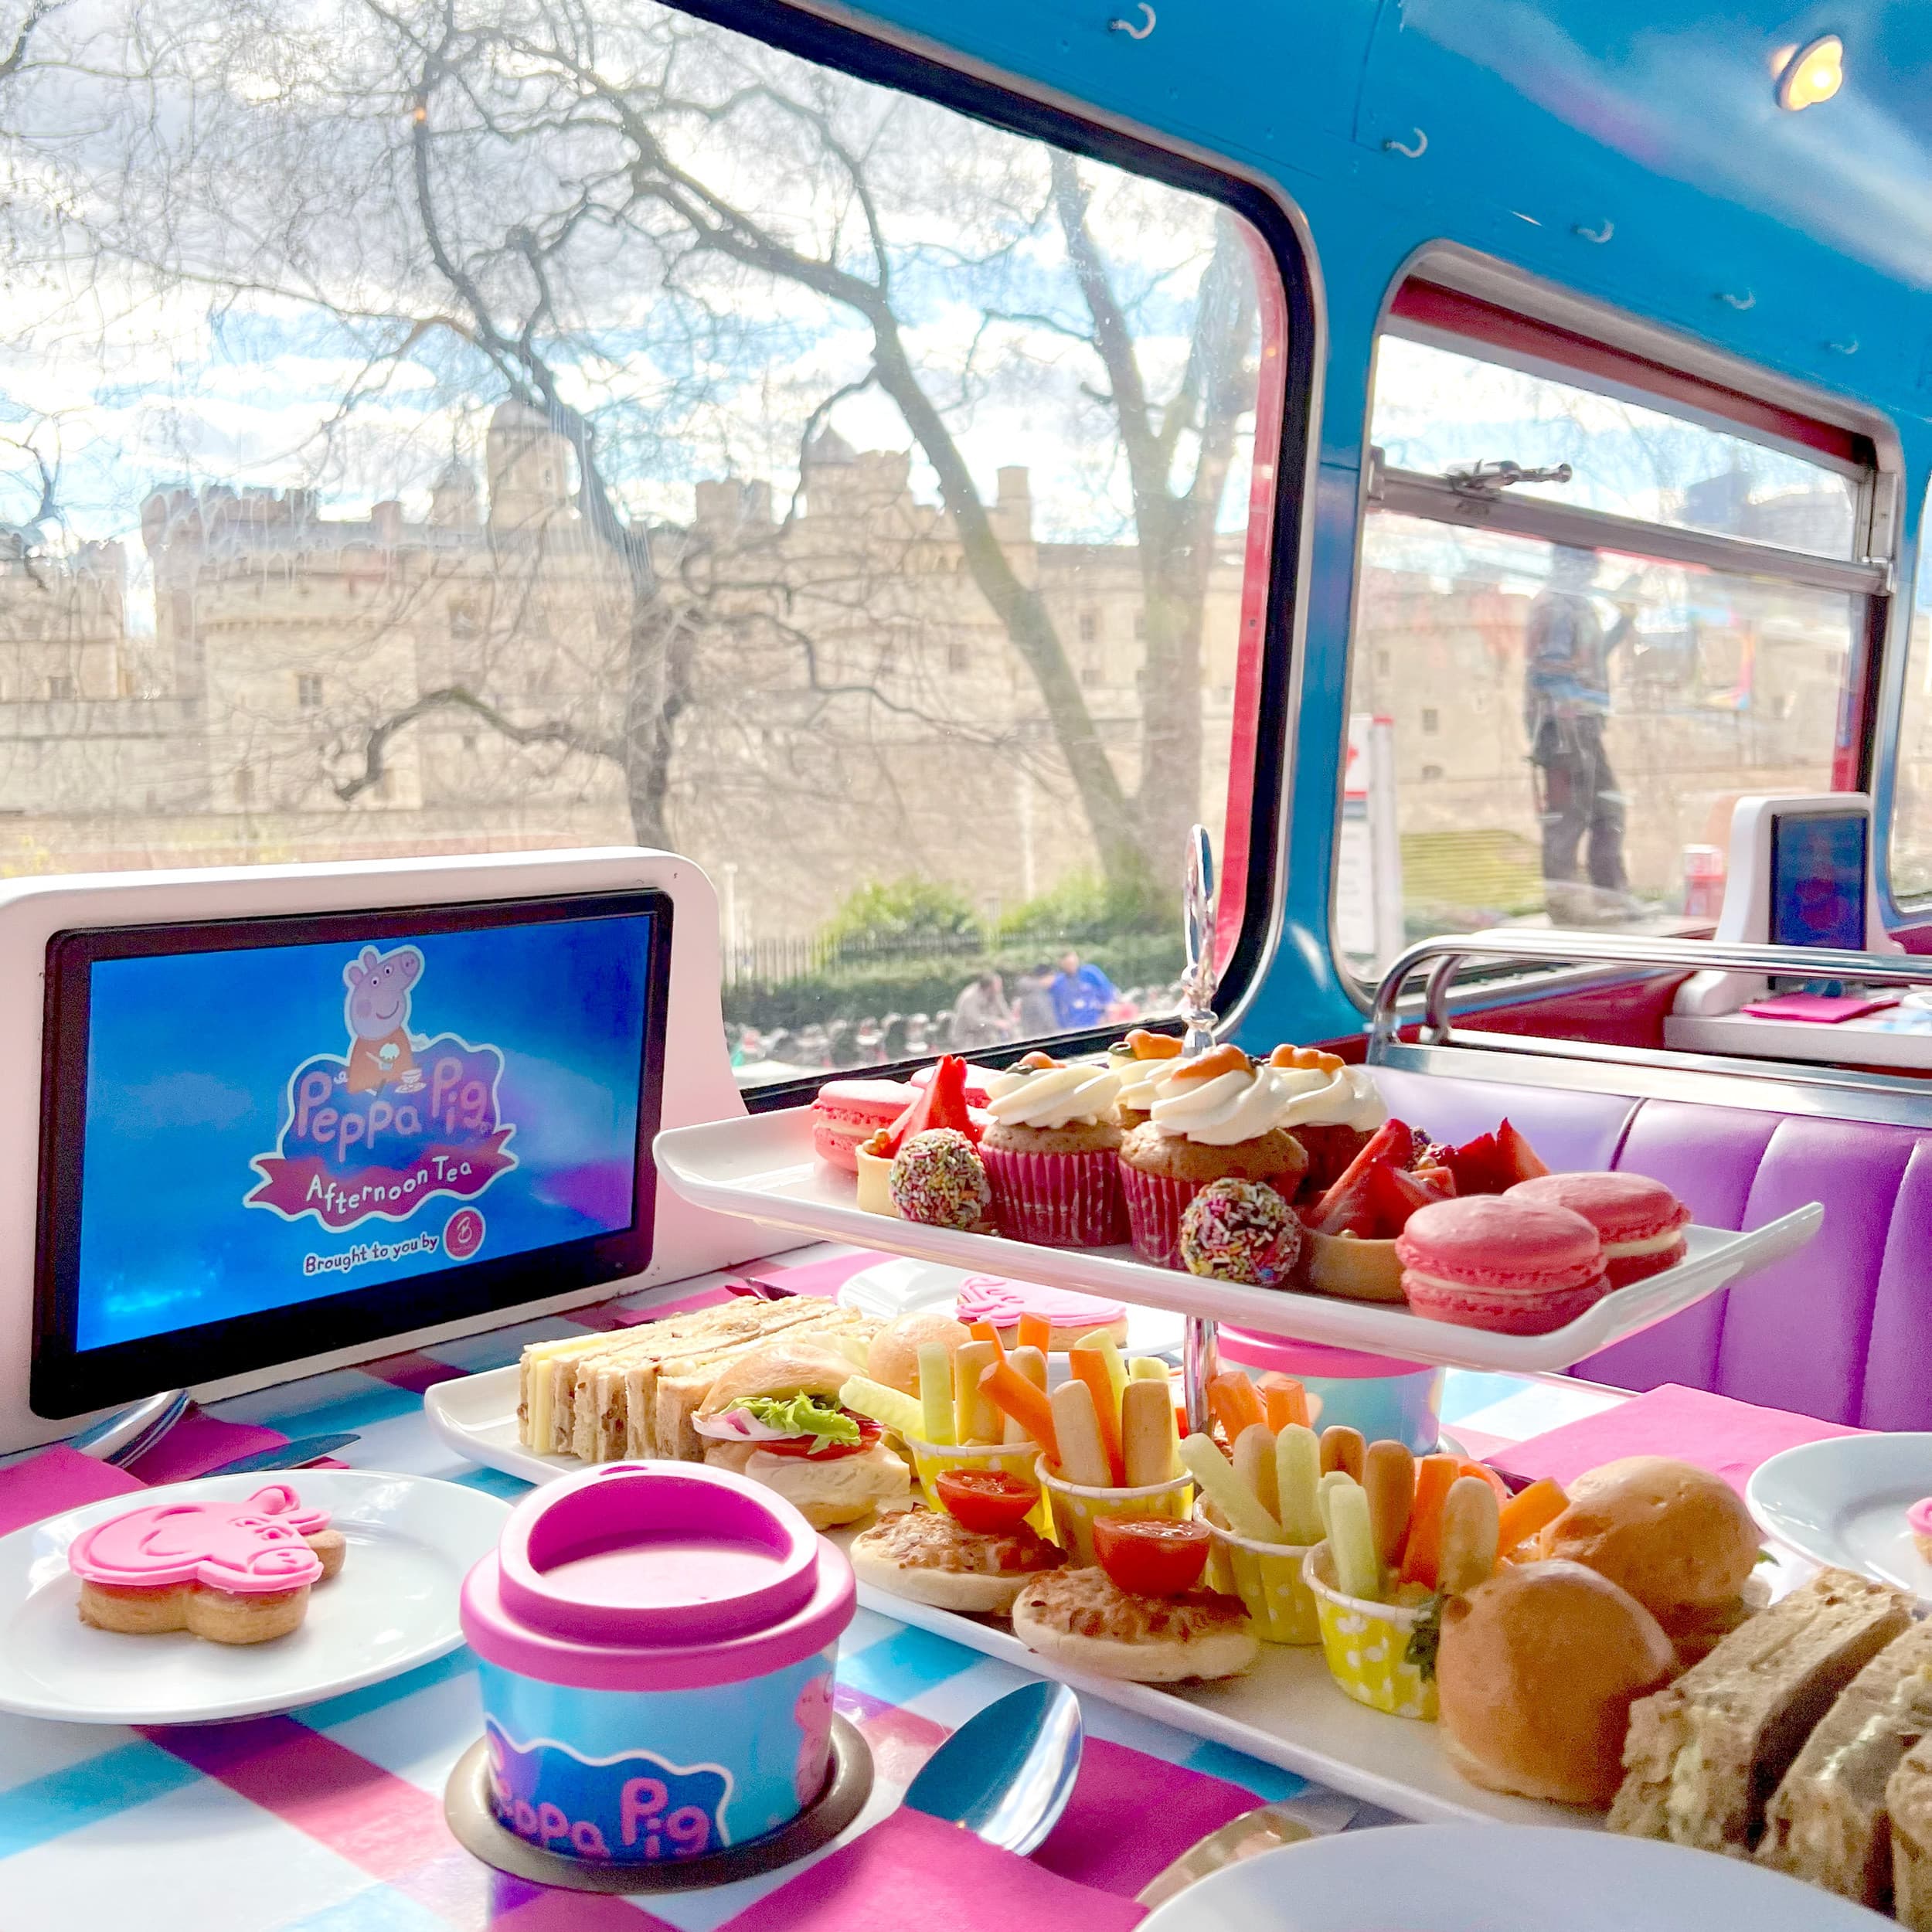 Peppa Pig Bus Tour - great for London day trips